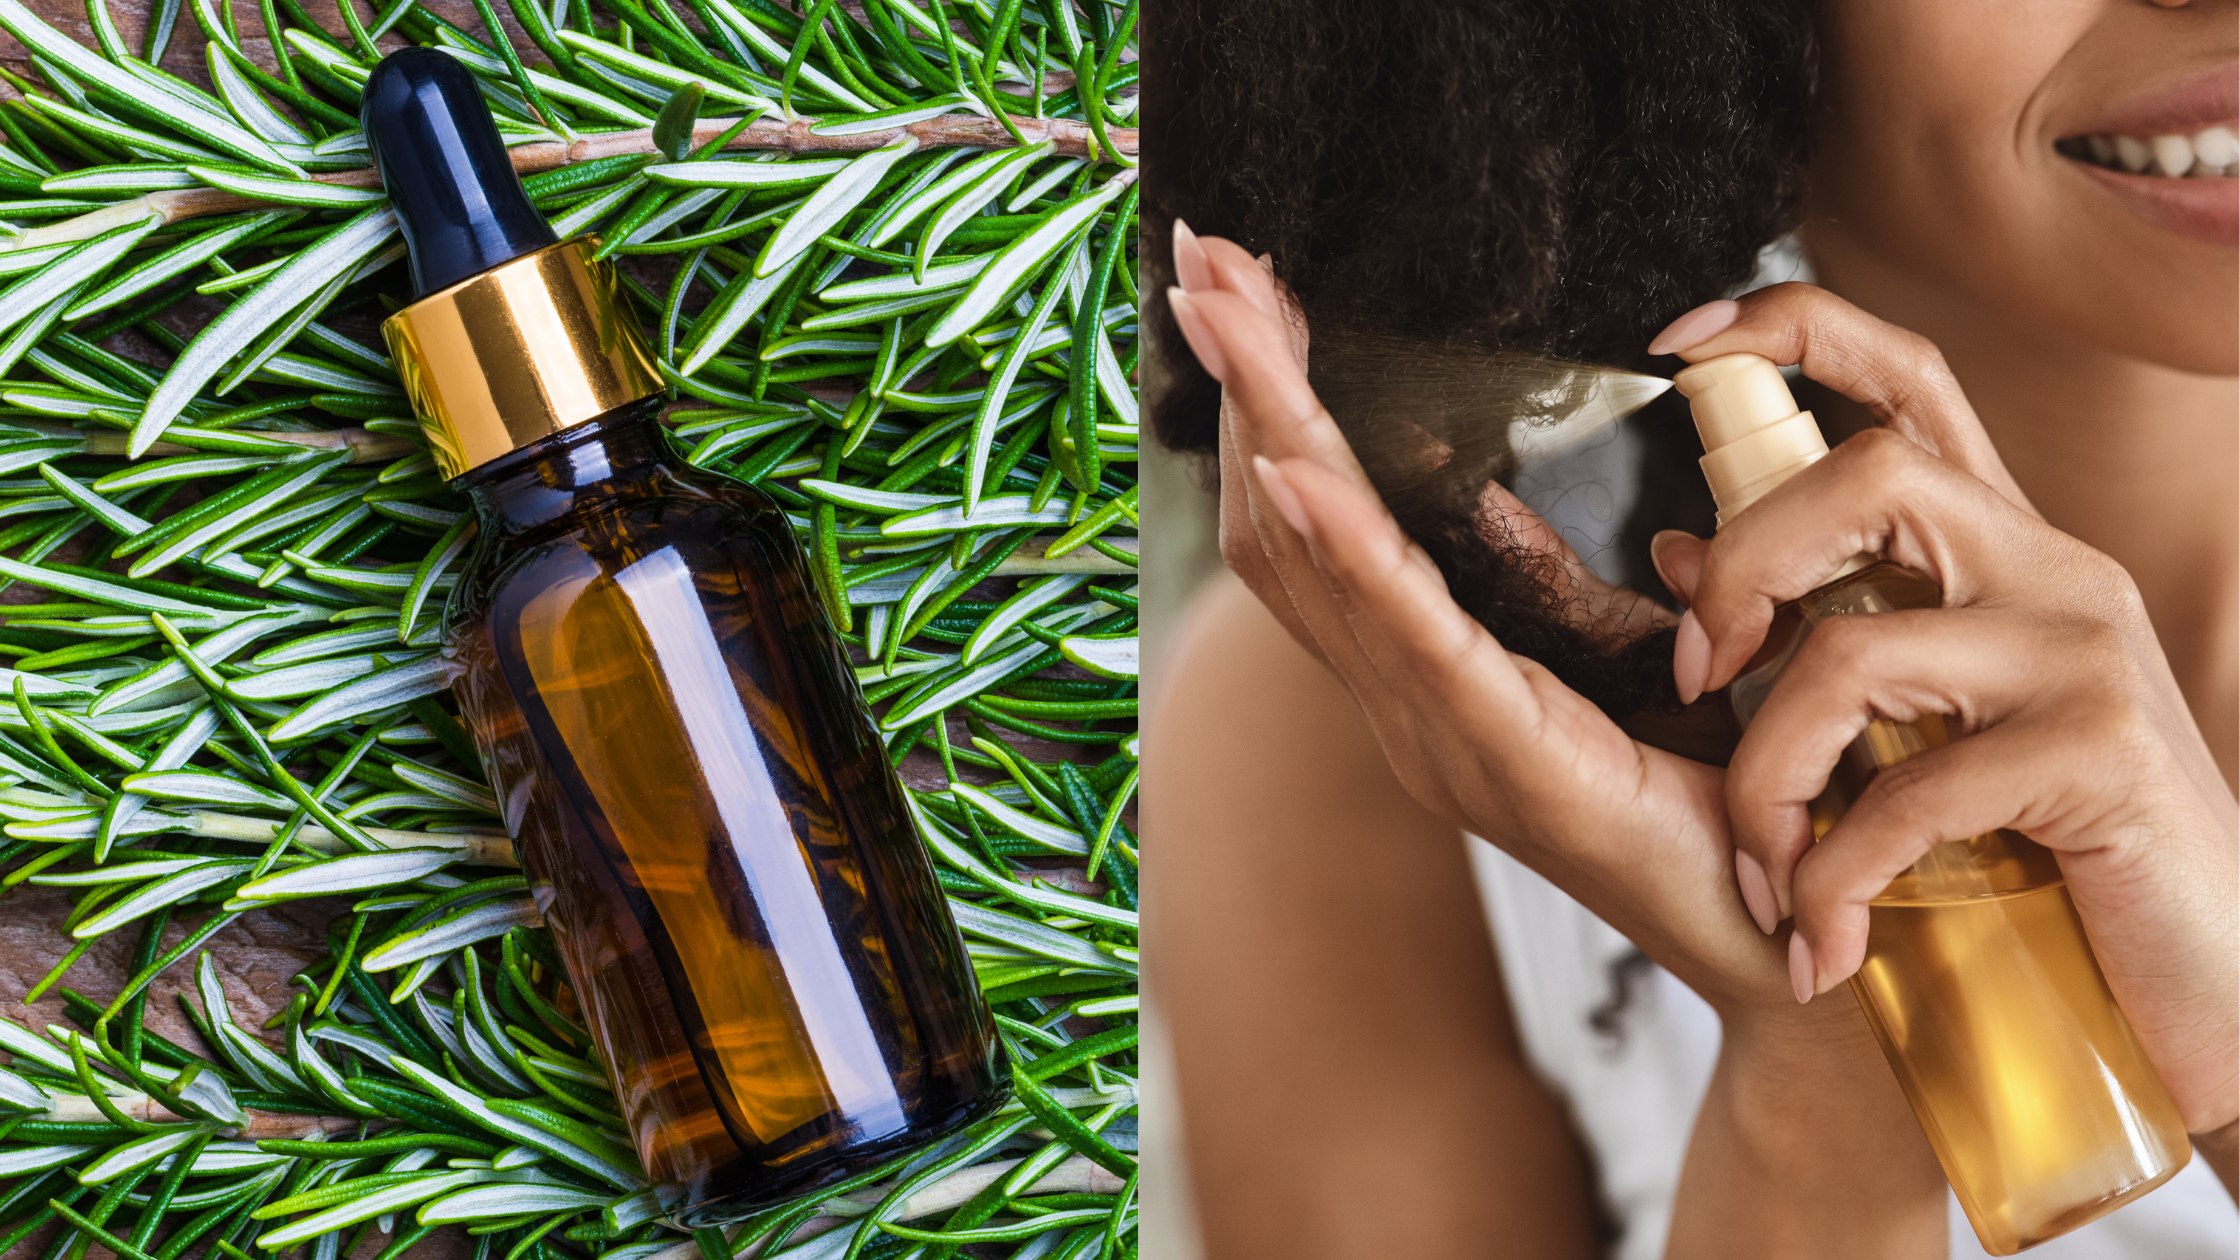 Examining Rosemary: Hair Loss Solution or Overhyped Myth